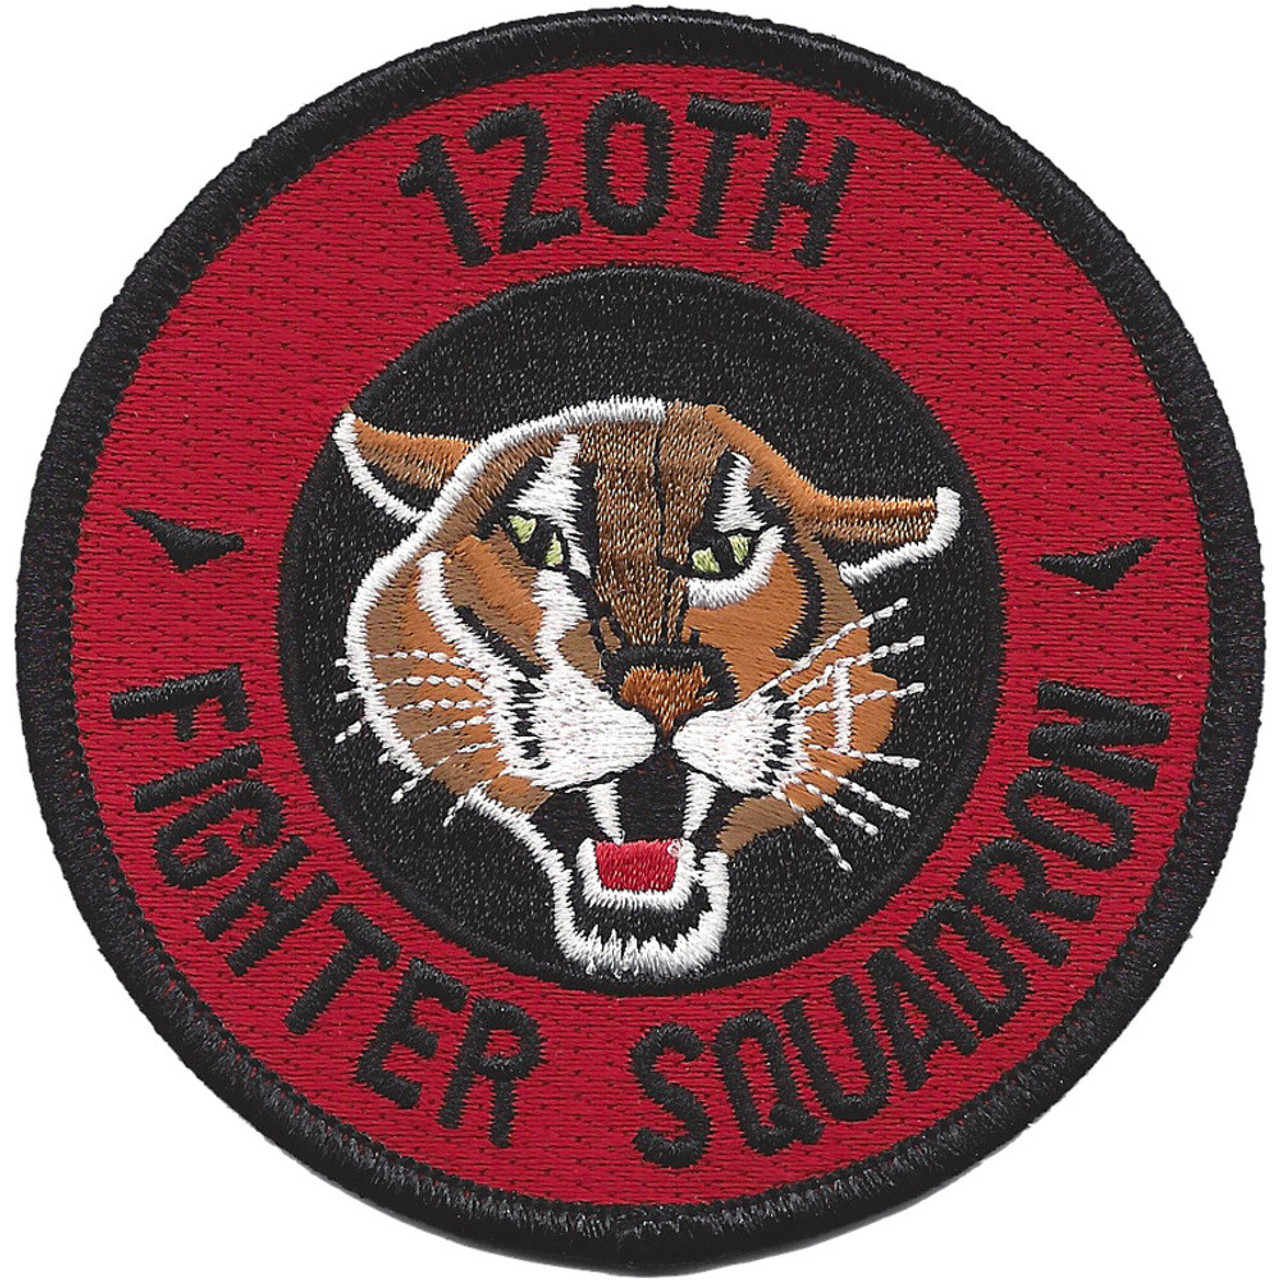 Usaf Squadron Patches Us Air Force Squadron Patches